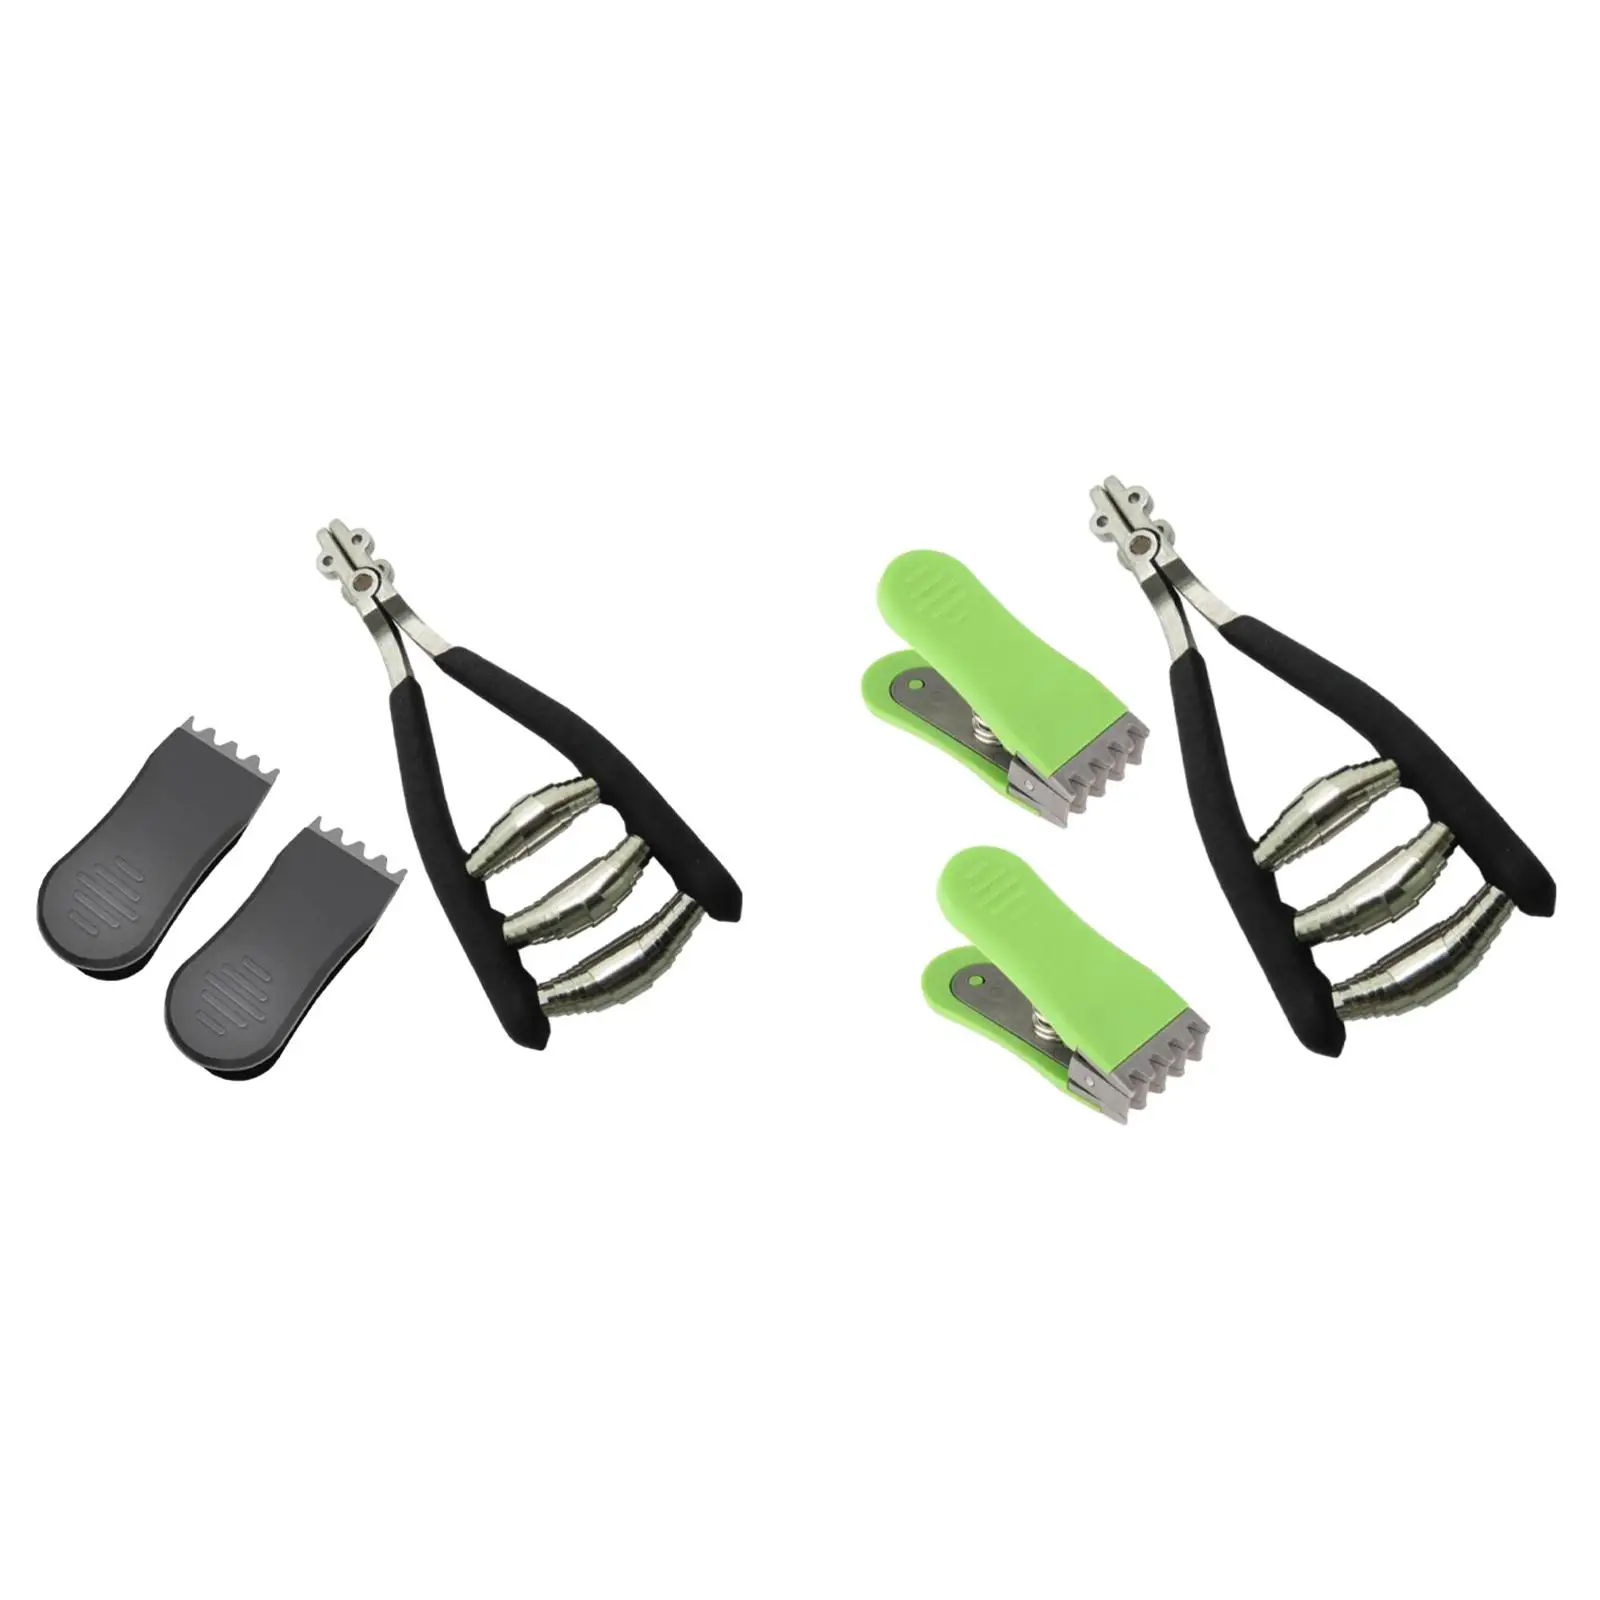 Starting Clamp Stringing Clamp Wide Head Equipment for Racquet Racket Squash